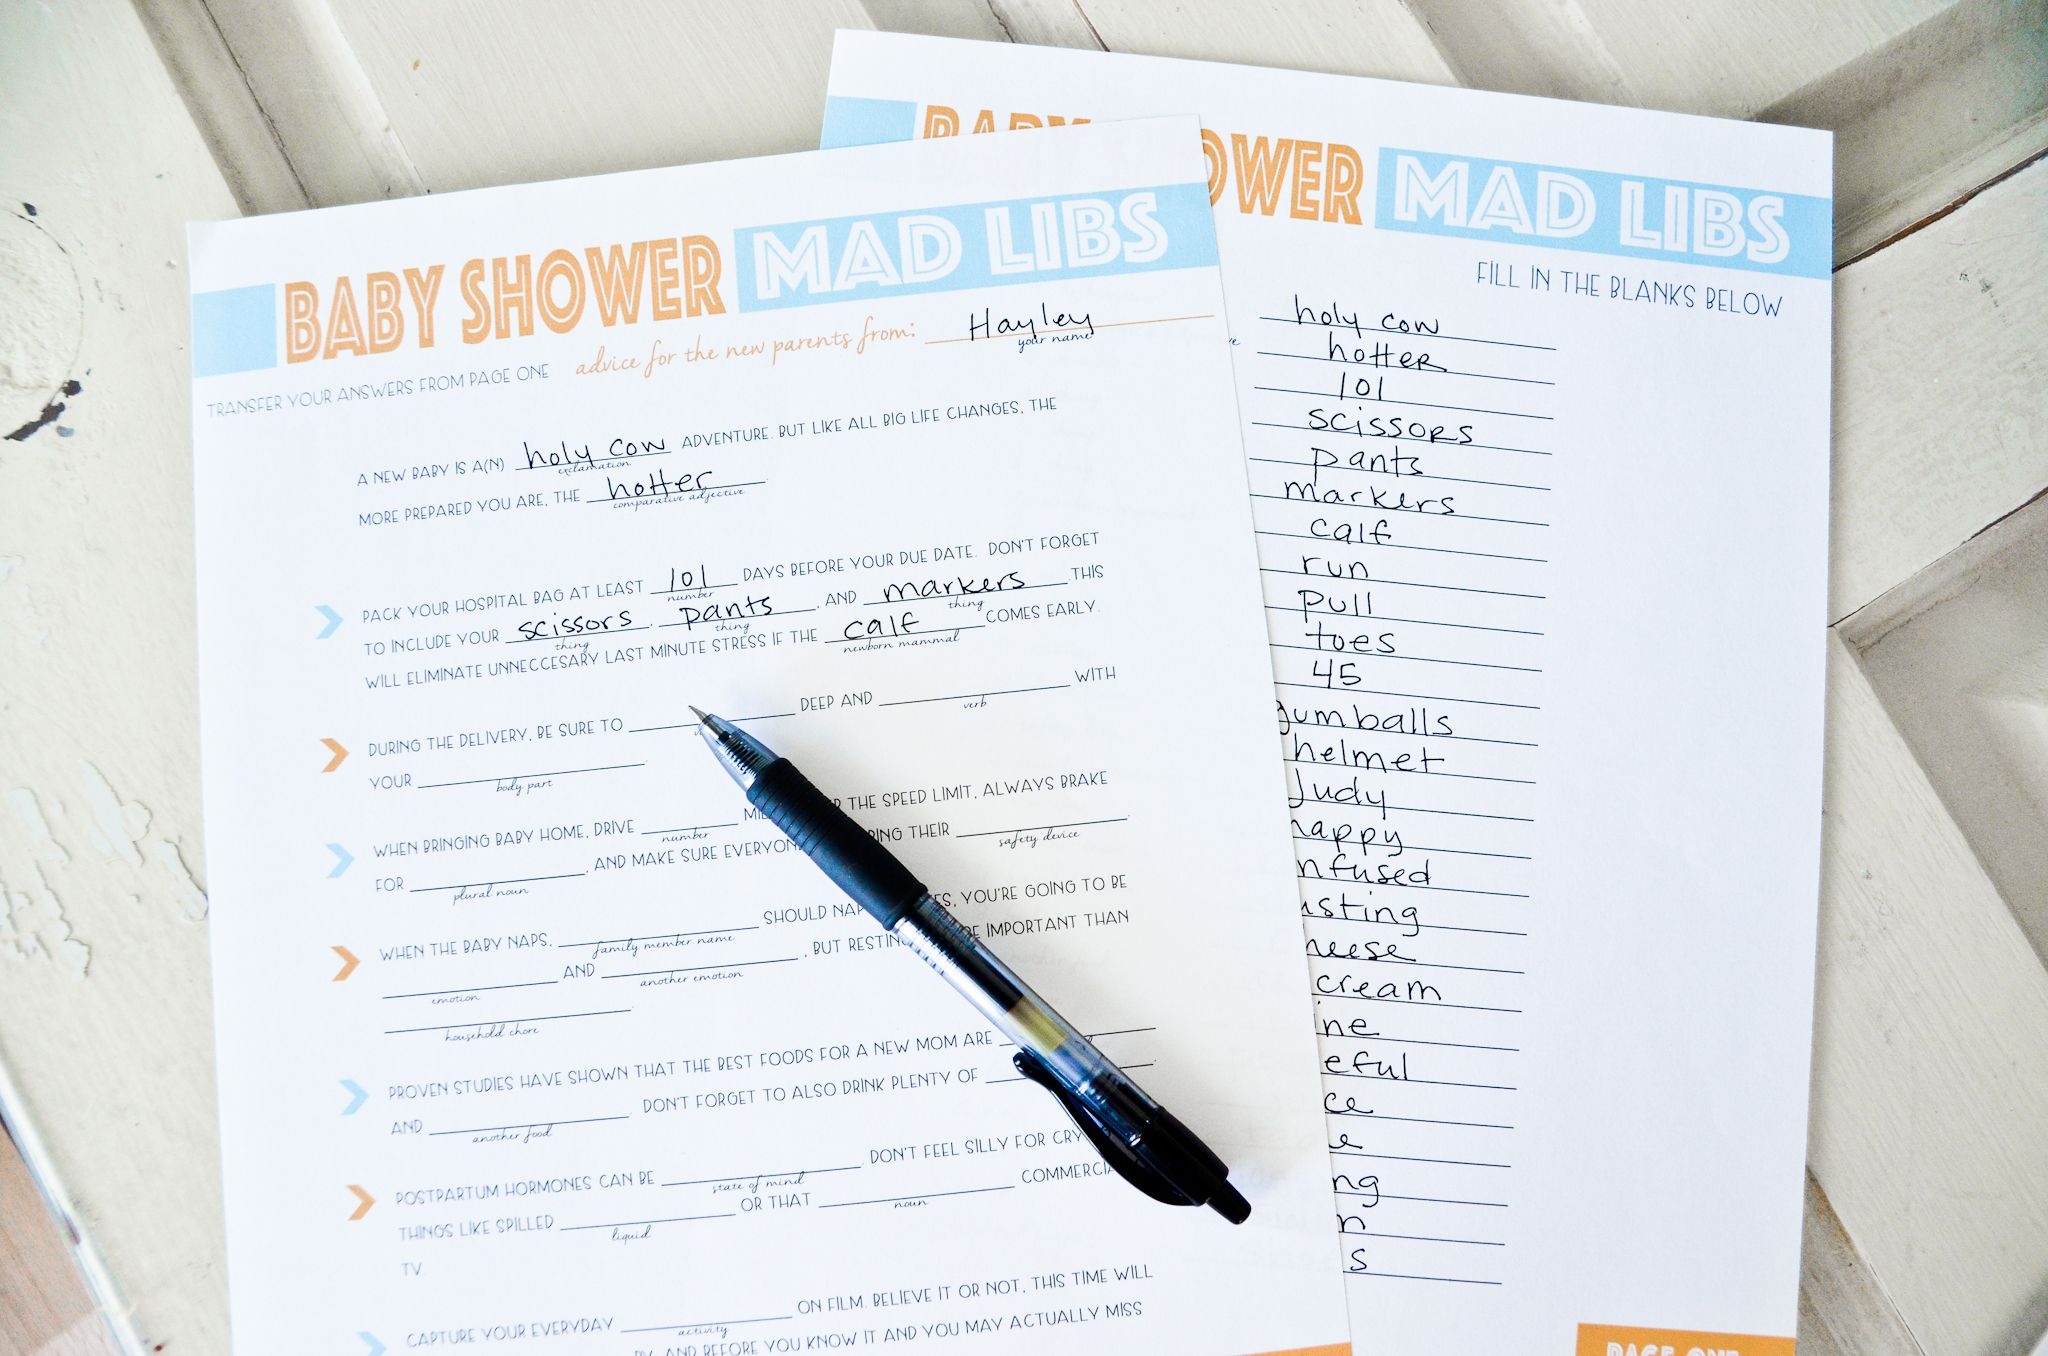 Free Printable Baby Shower Mad Libs | Baby Shower | Baby Shower Mad - Baby Shower Mad Libs Printable Free